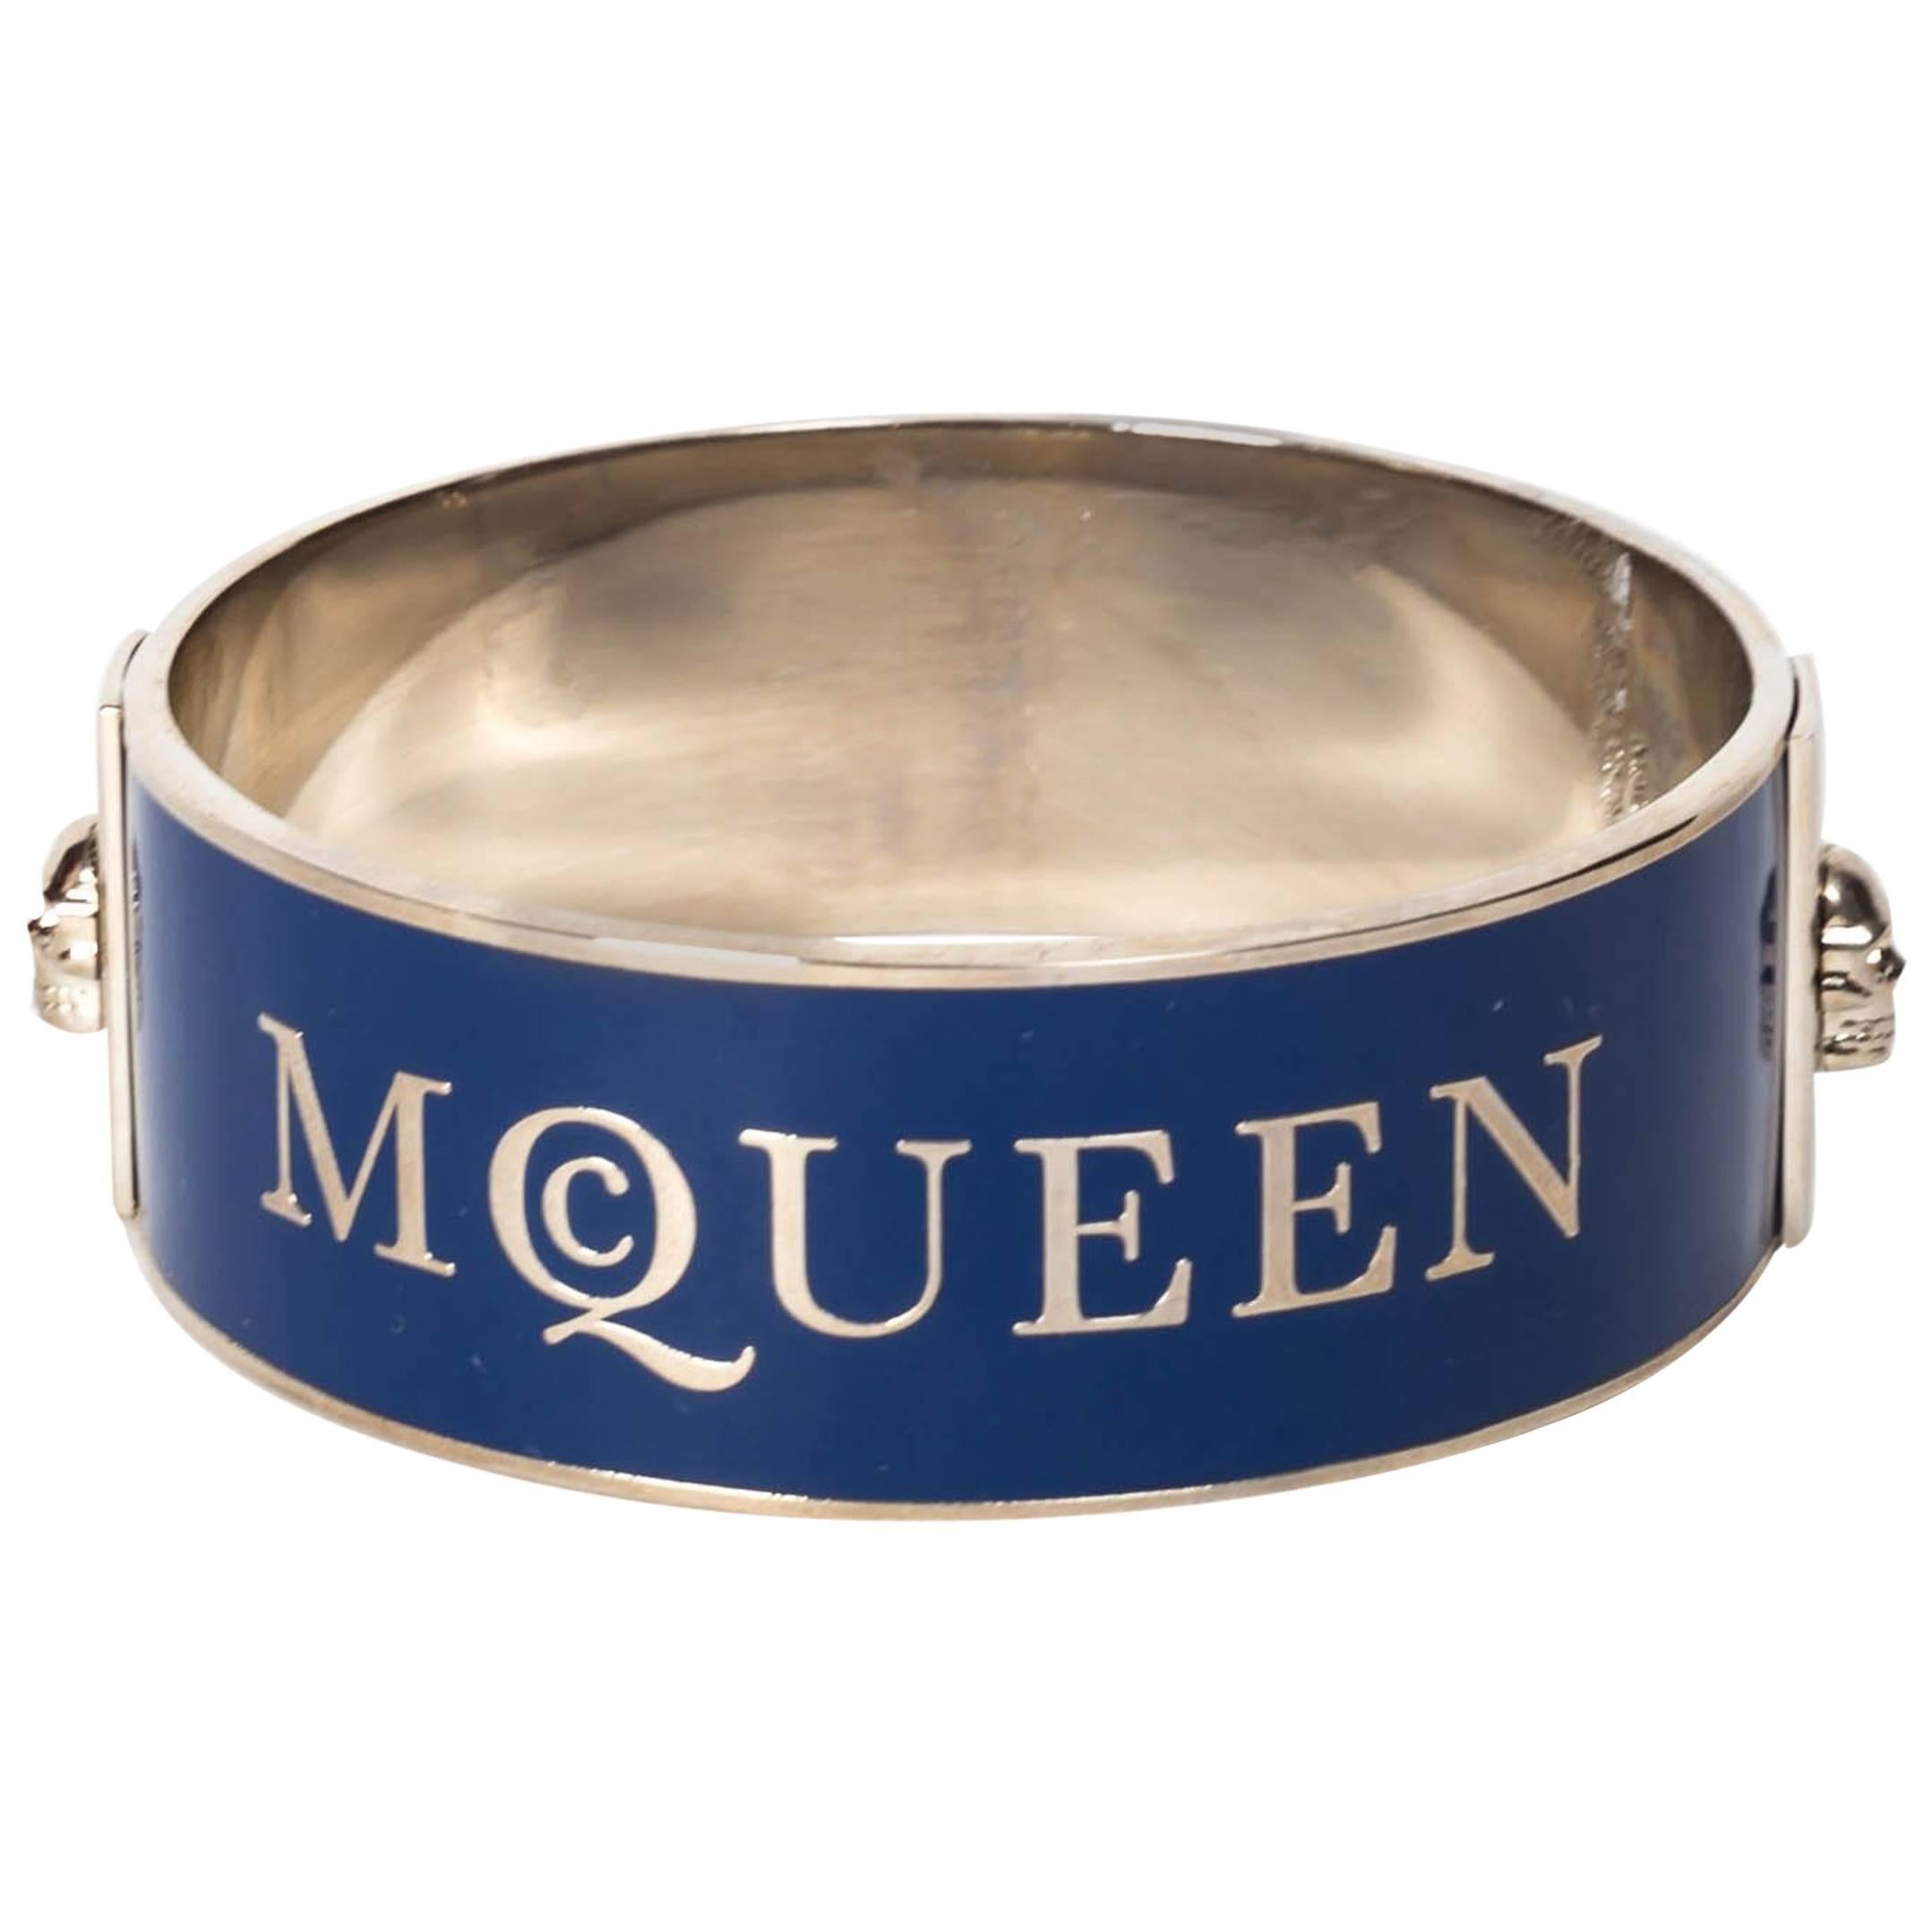 Alexander McQueen Cuff in Navy Blue With Raised Silver Lettering